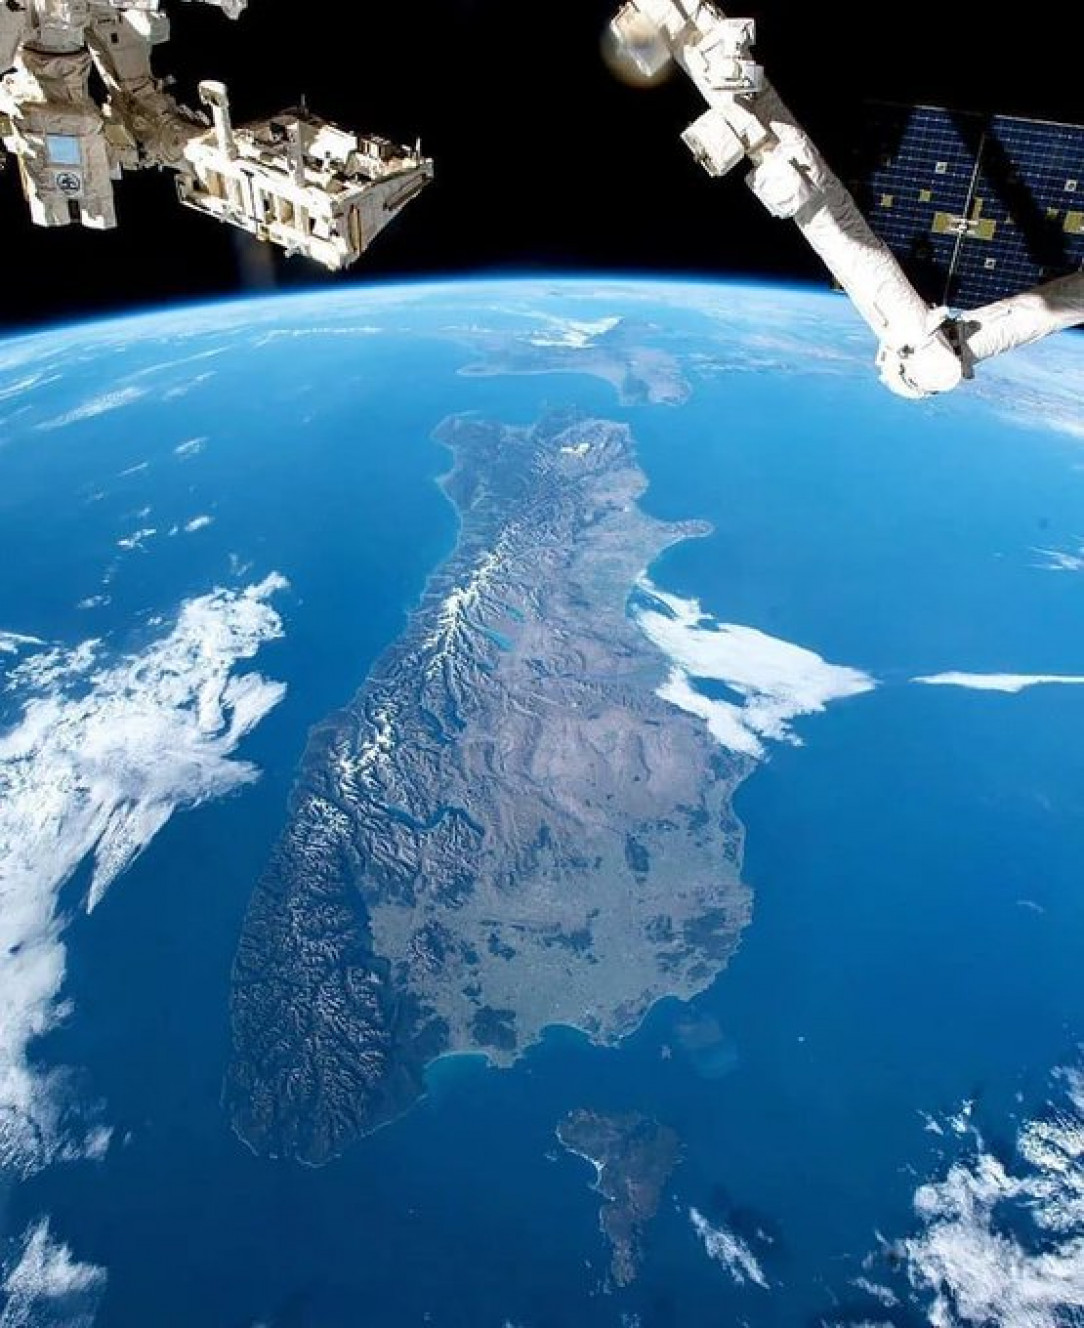 New Zealand seen from the International Space Station